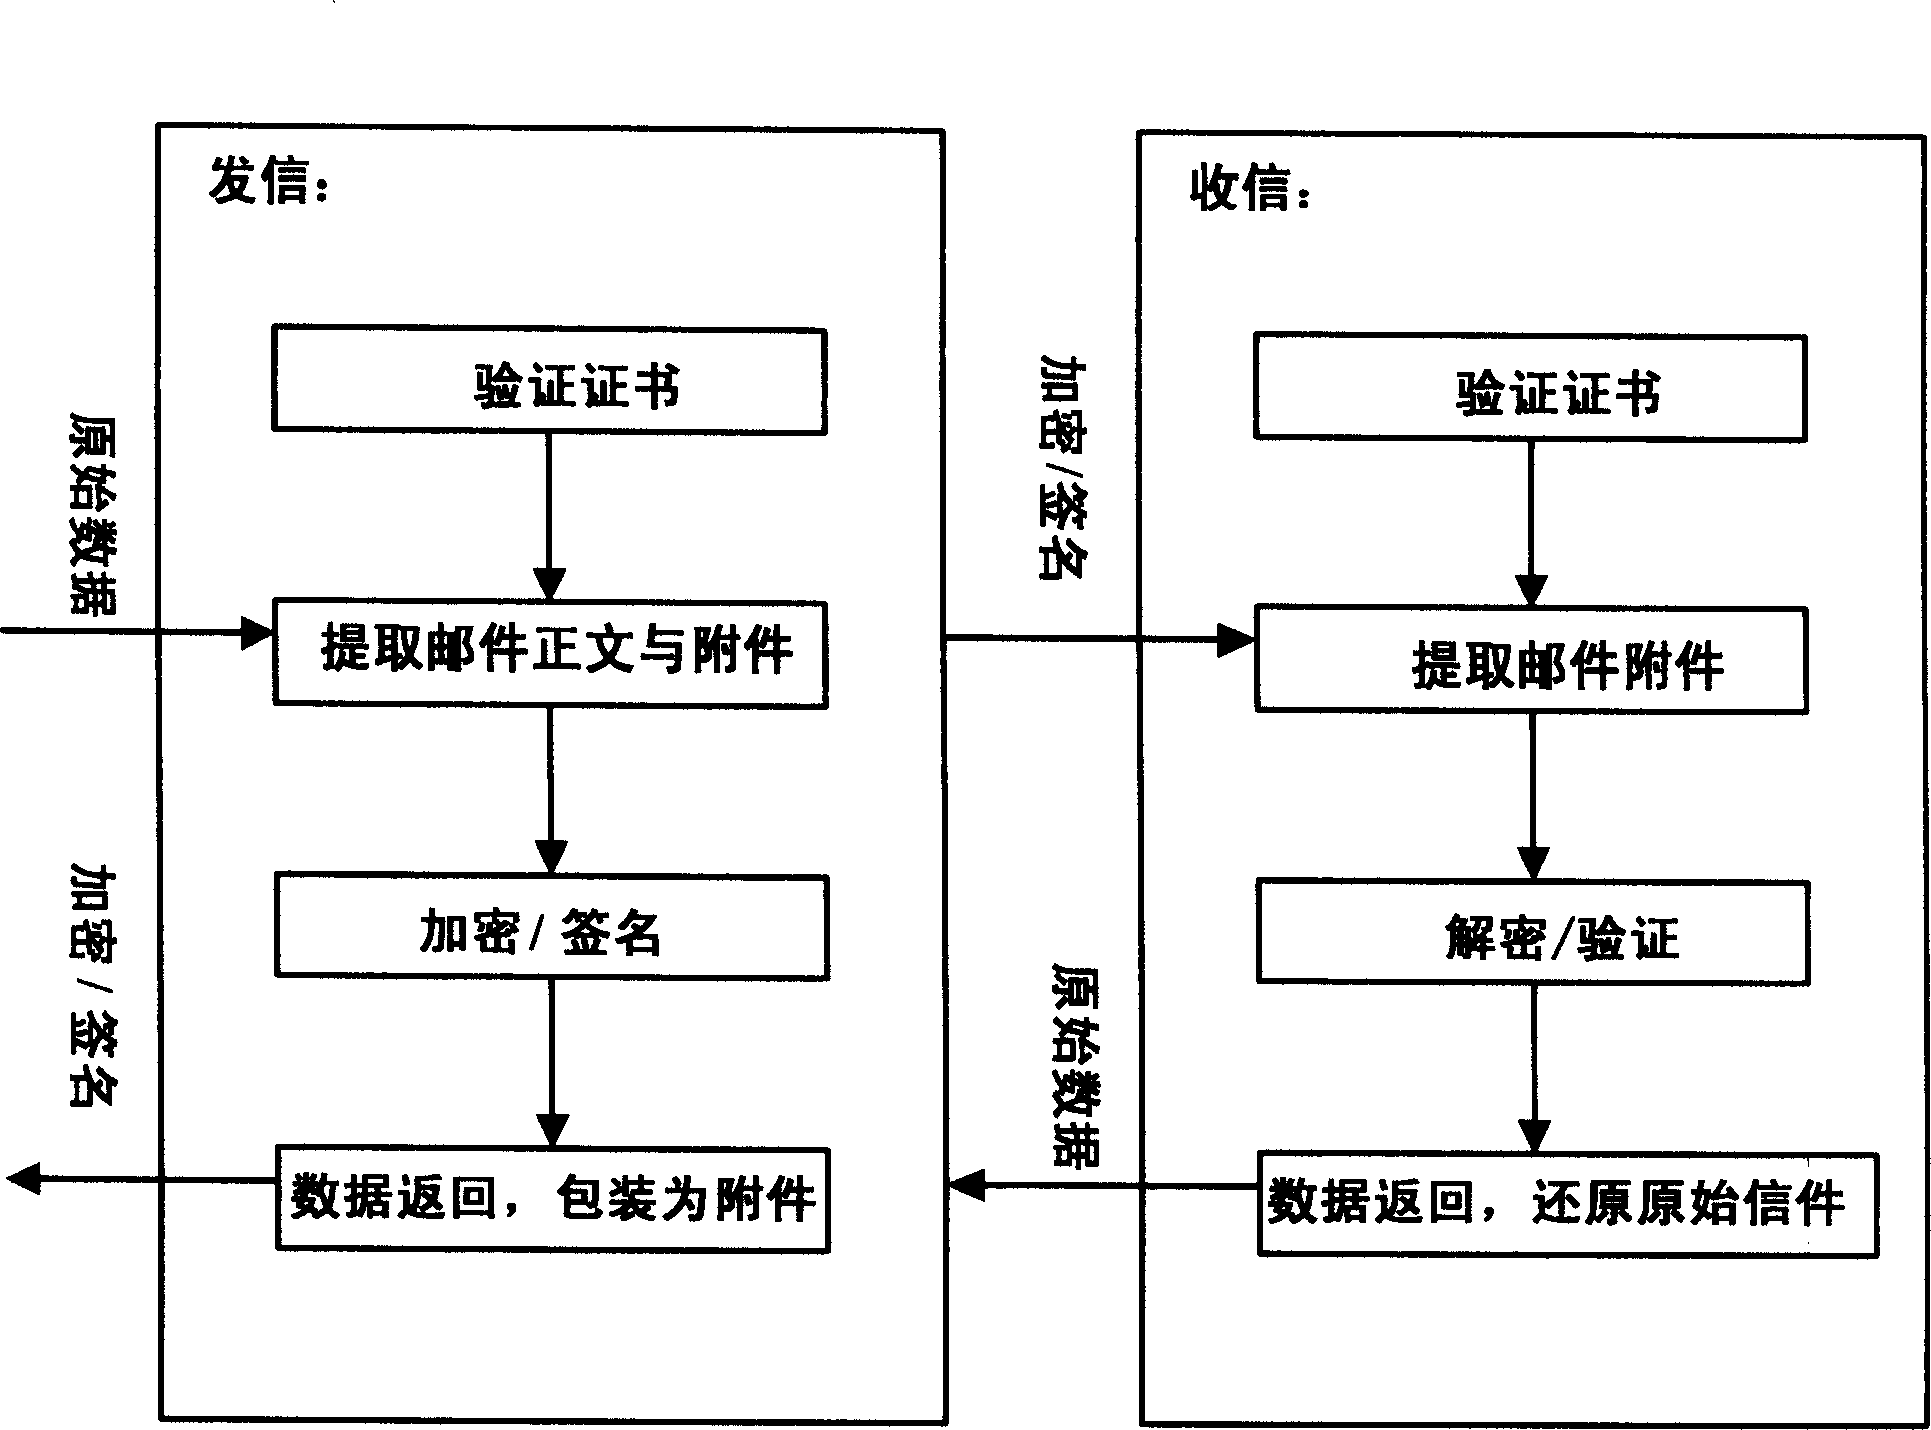 Electronic mail system and method based on CPK safety authentication